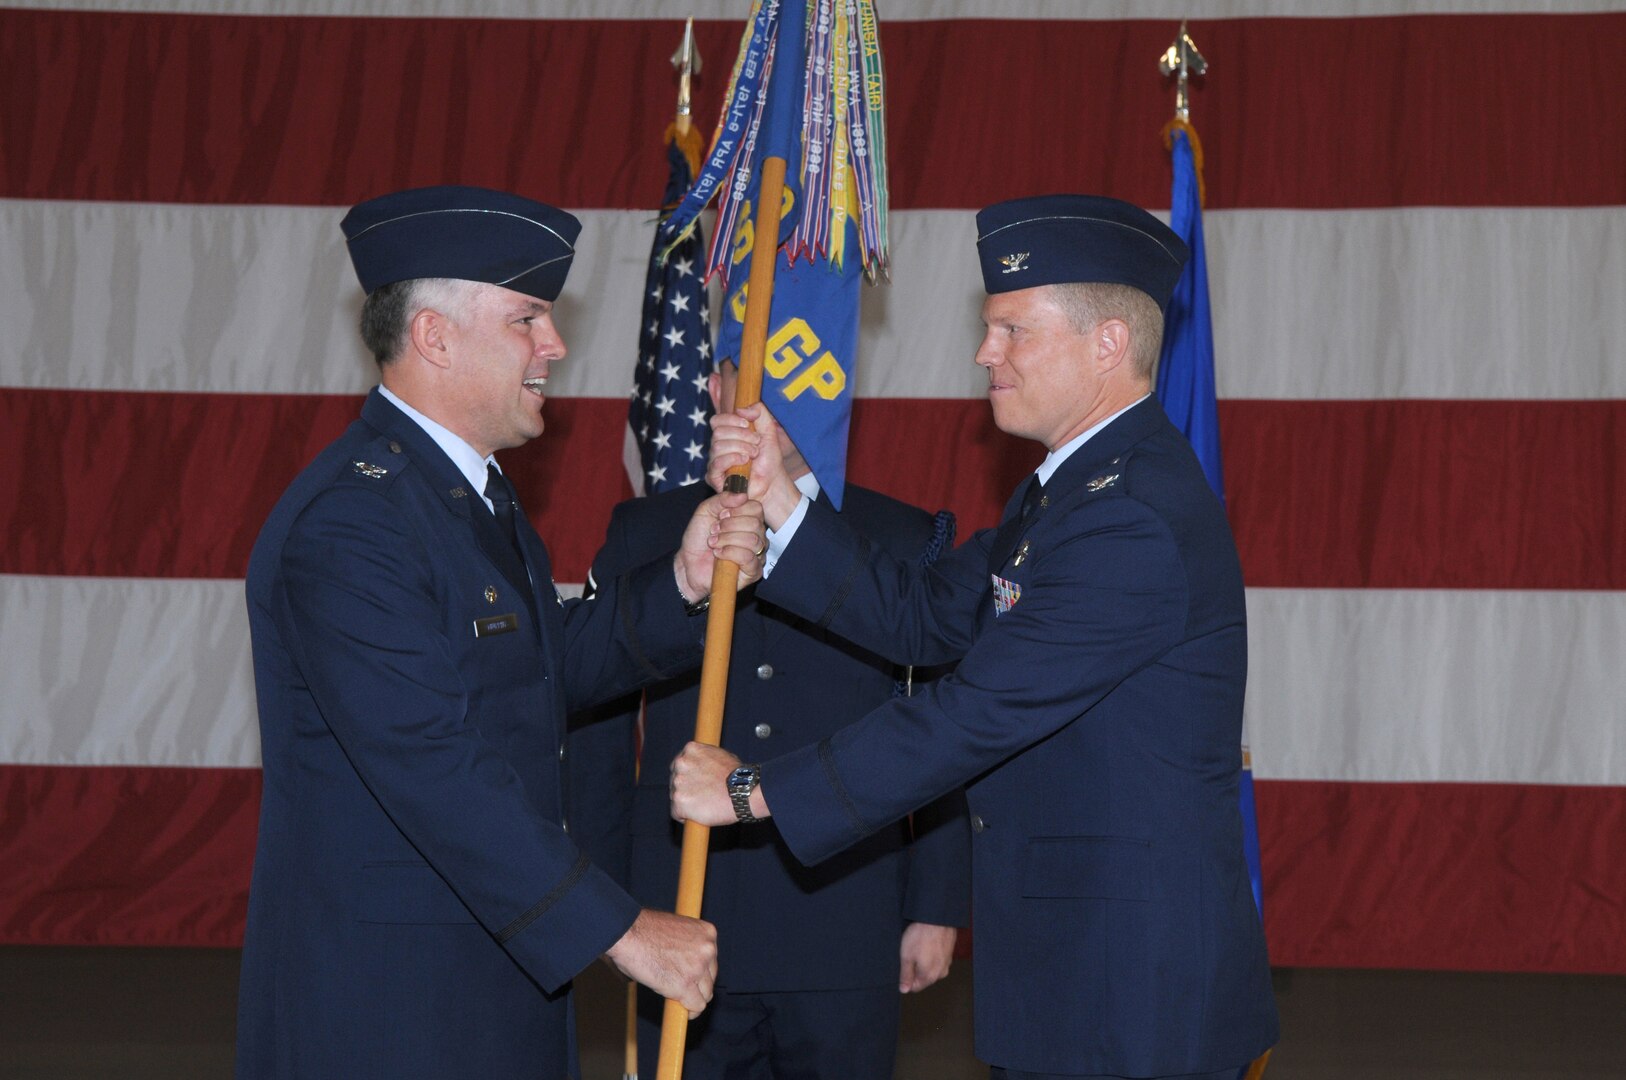 Col. Richard Murphy (left),12th Flying Training Wing commander, passes the guidon to Col. Andrew Croft (right) as he assumes command of the 12th Operations Group at Randolph Air Force Base July 23. (U.S. Air Force photo/Rich McFadden)